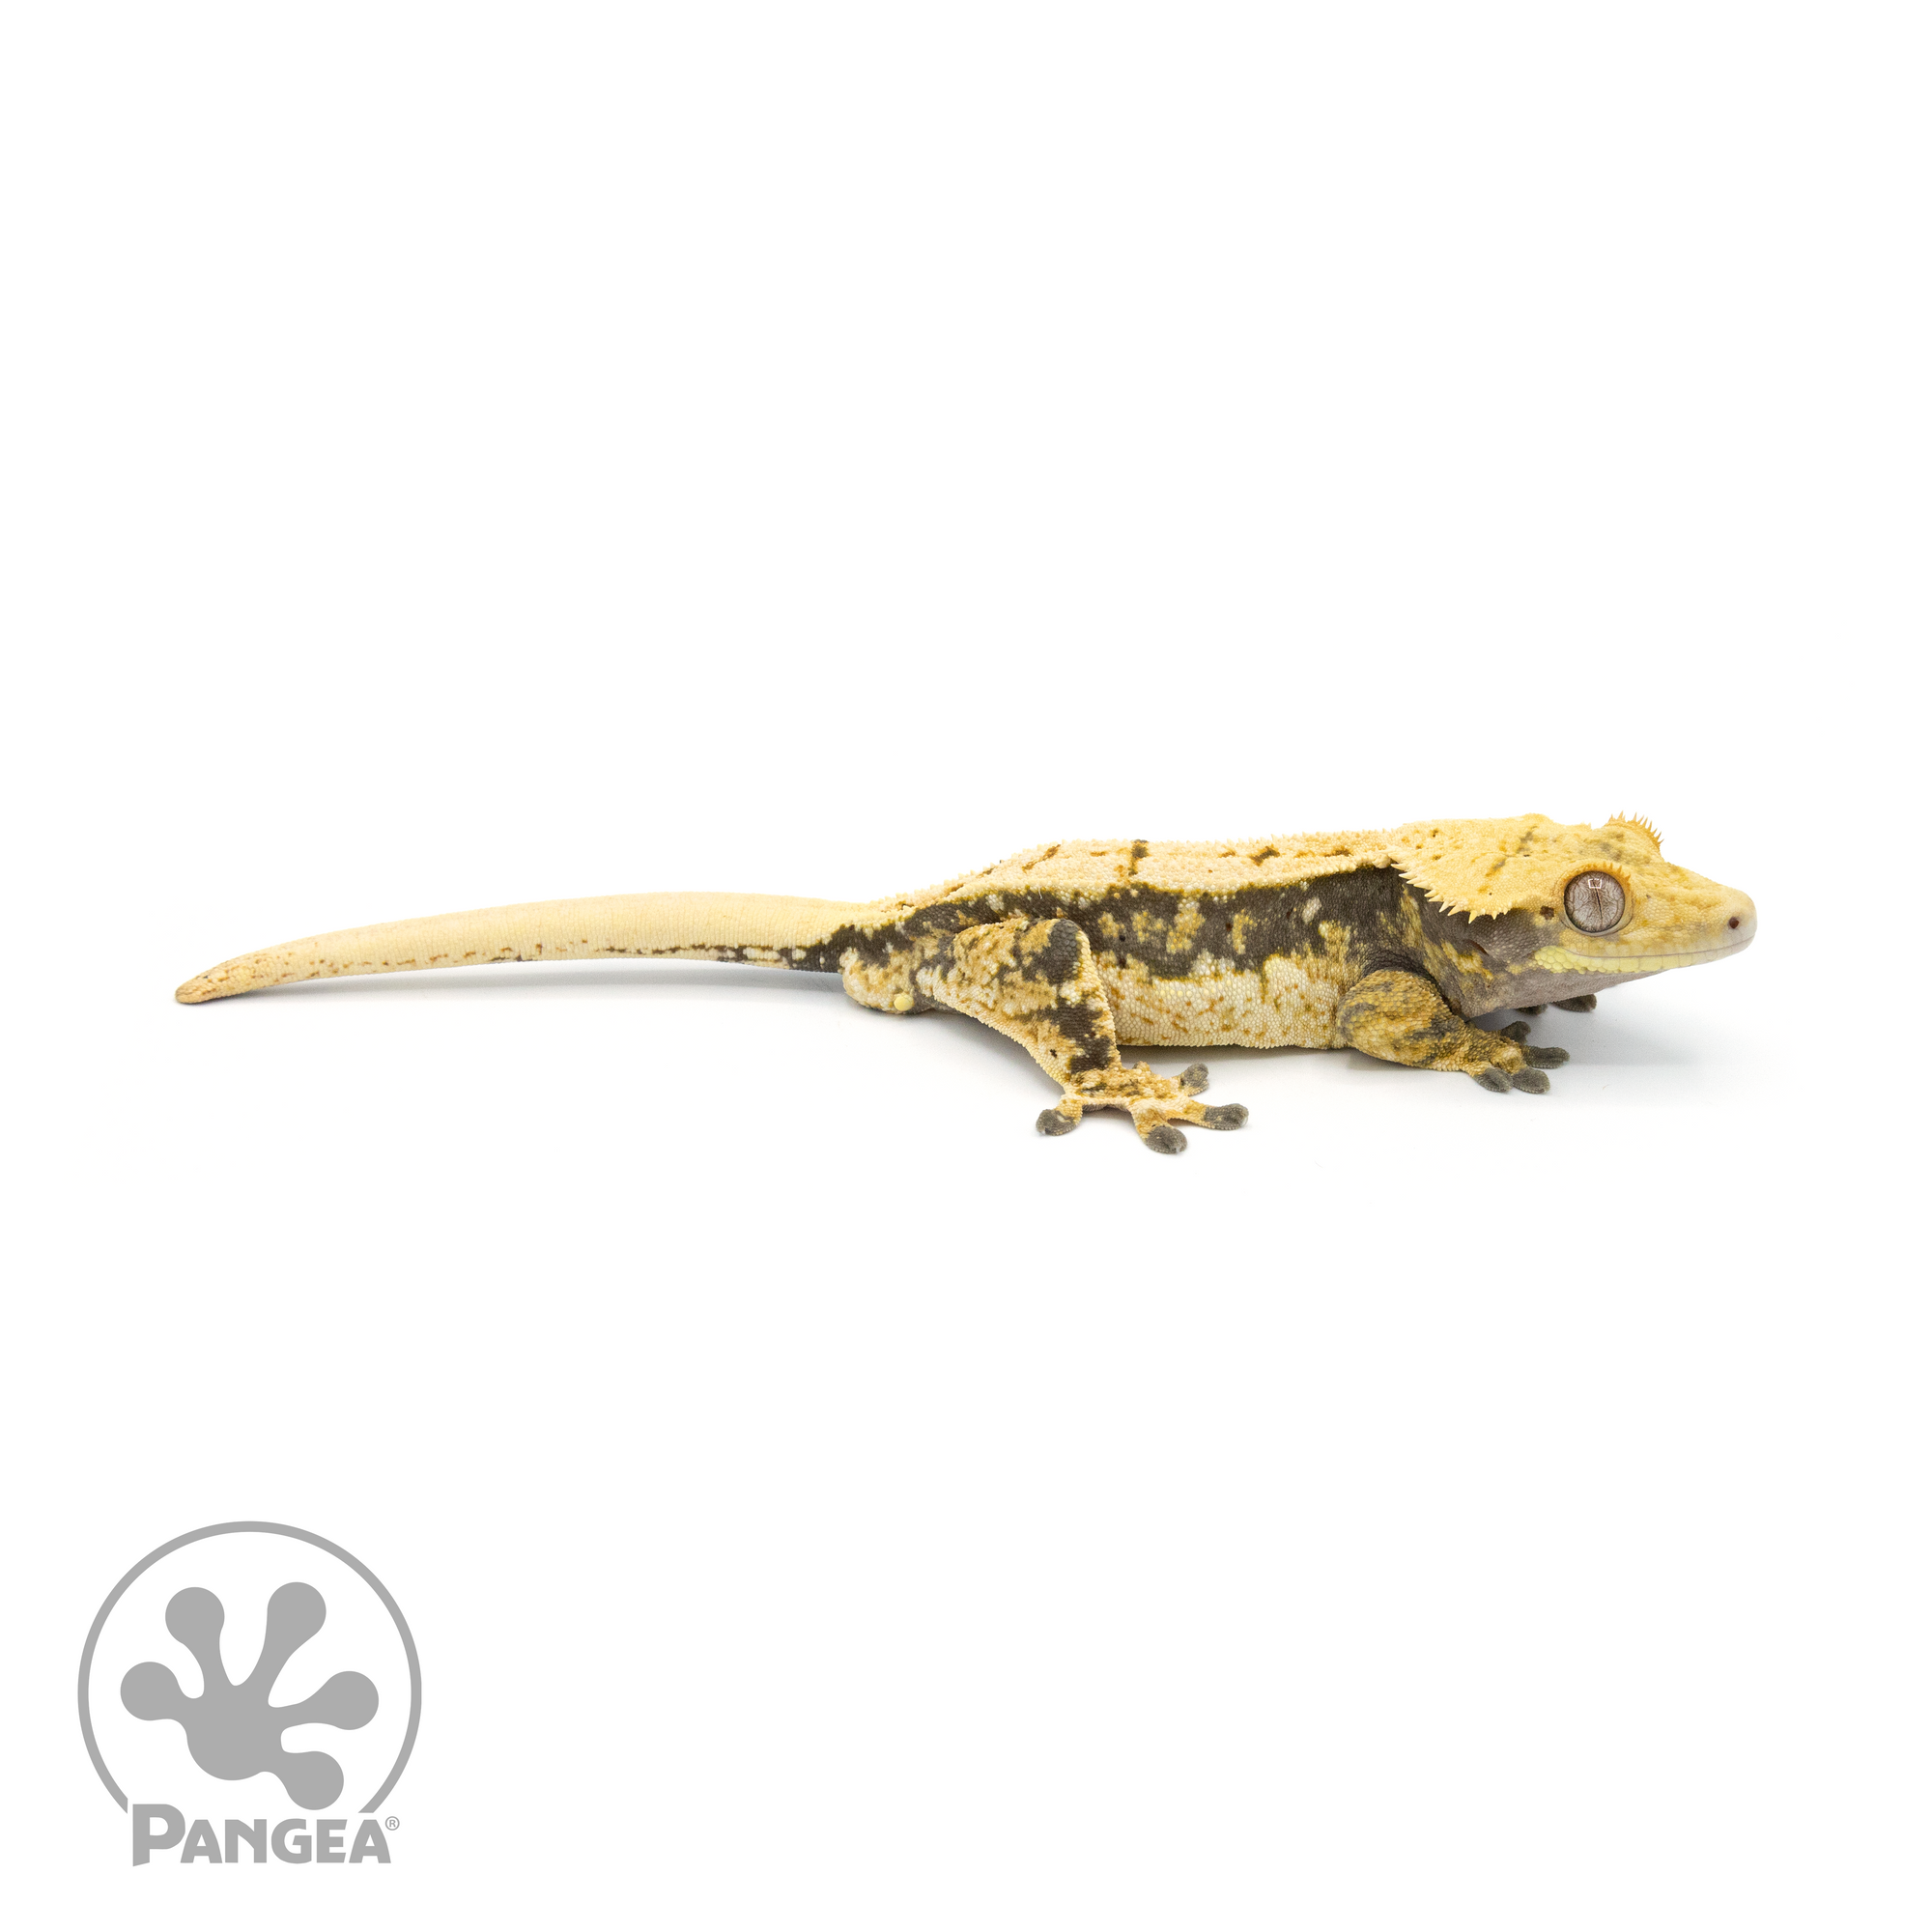 Male Pinstripe Crested Gecko Cr-1368 looking right 